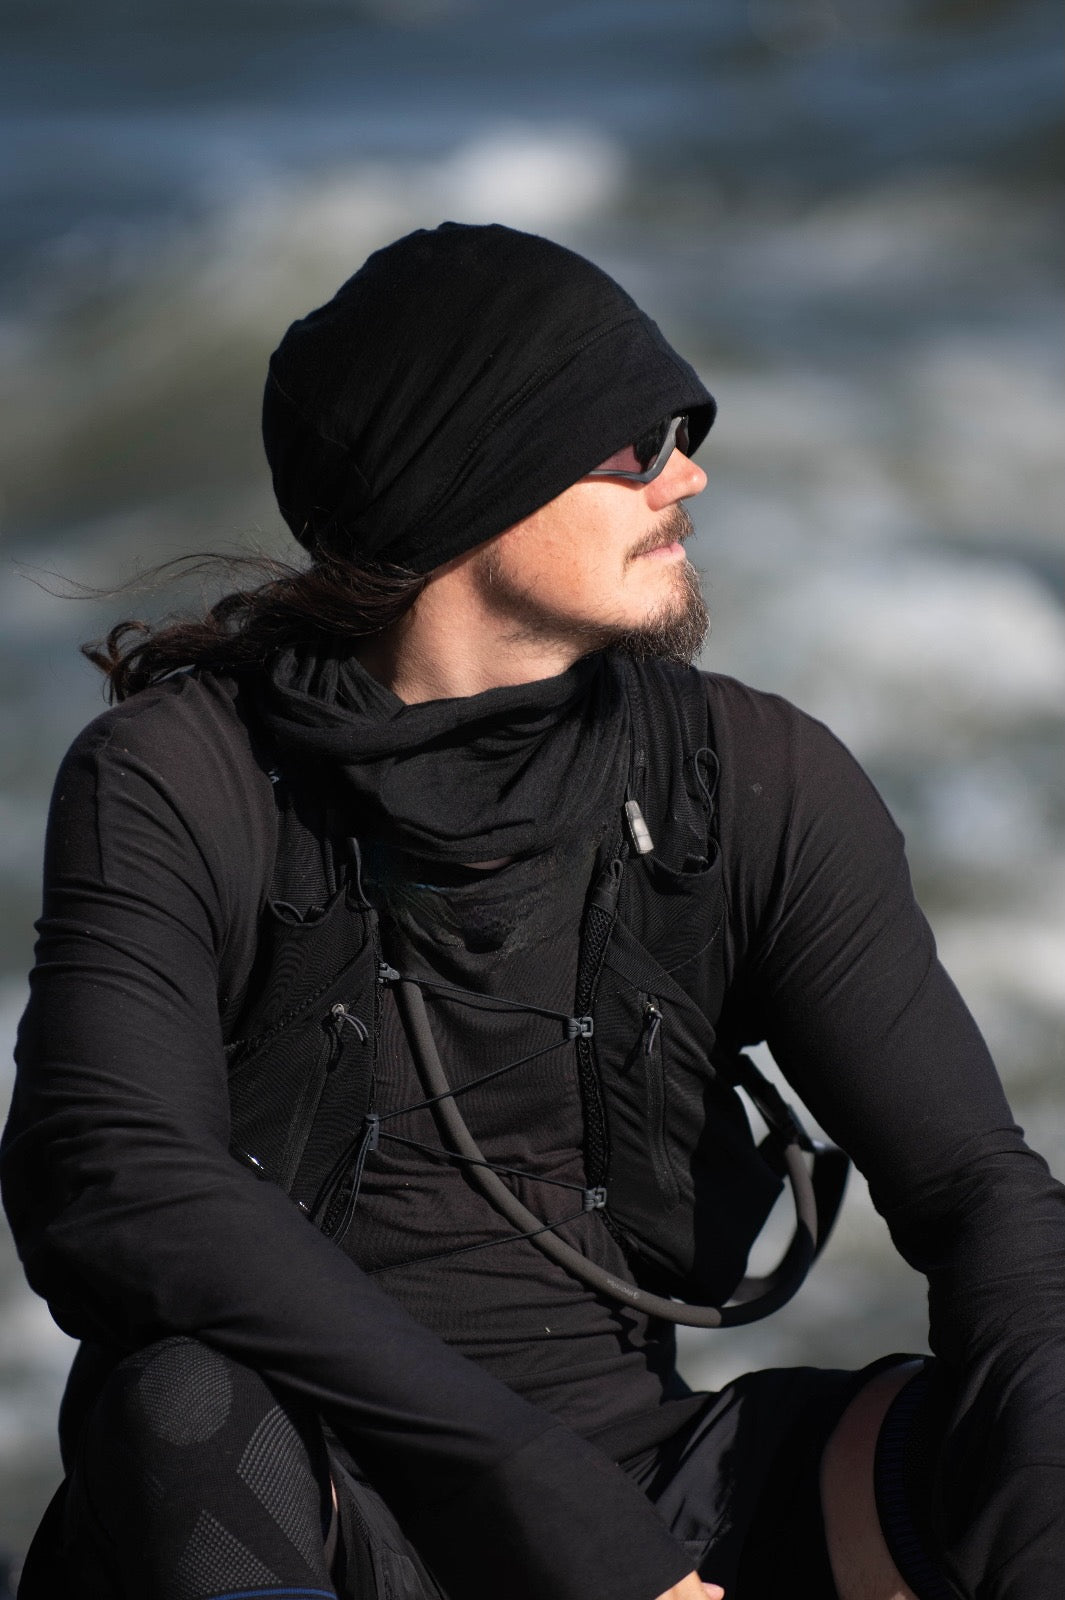 Whitewater Merino Liner hat for sports and bushcraft. Photo by Bouba Coly. Model : Jonathan Brunelle